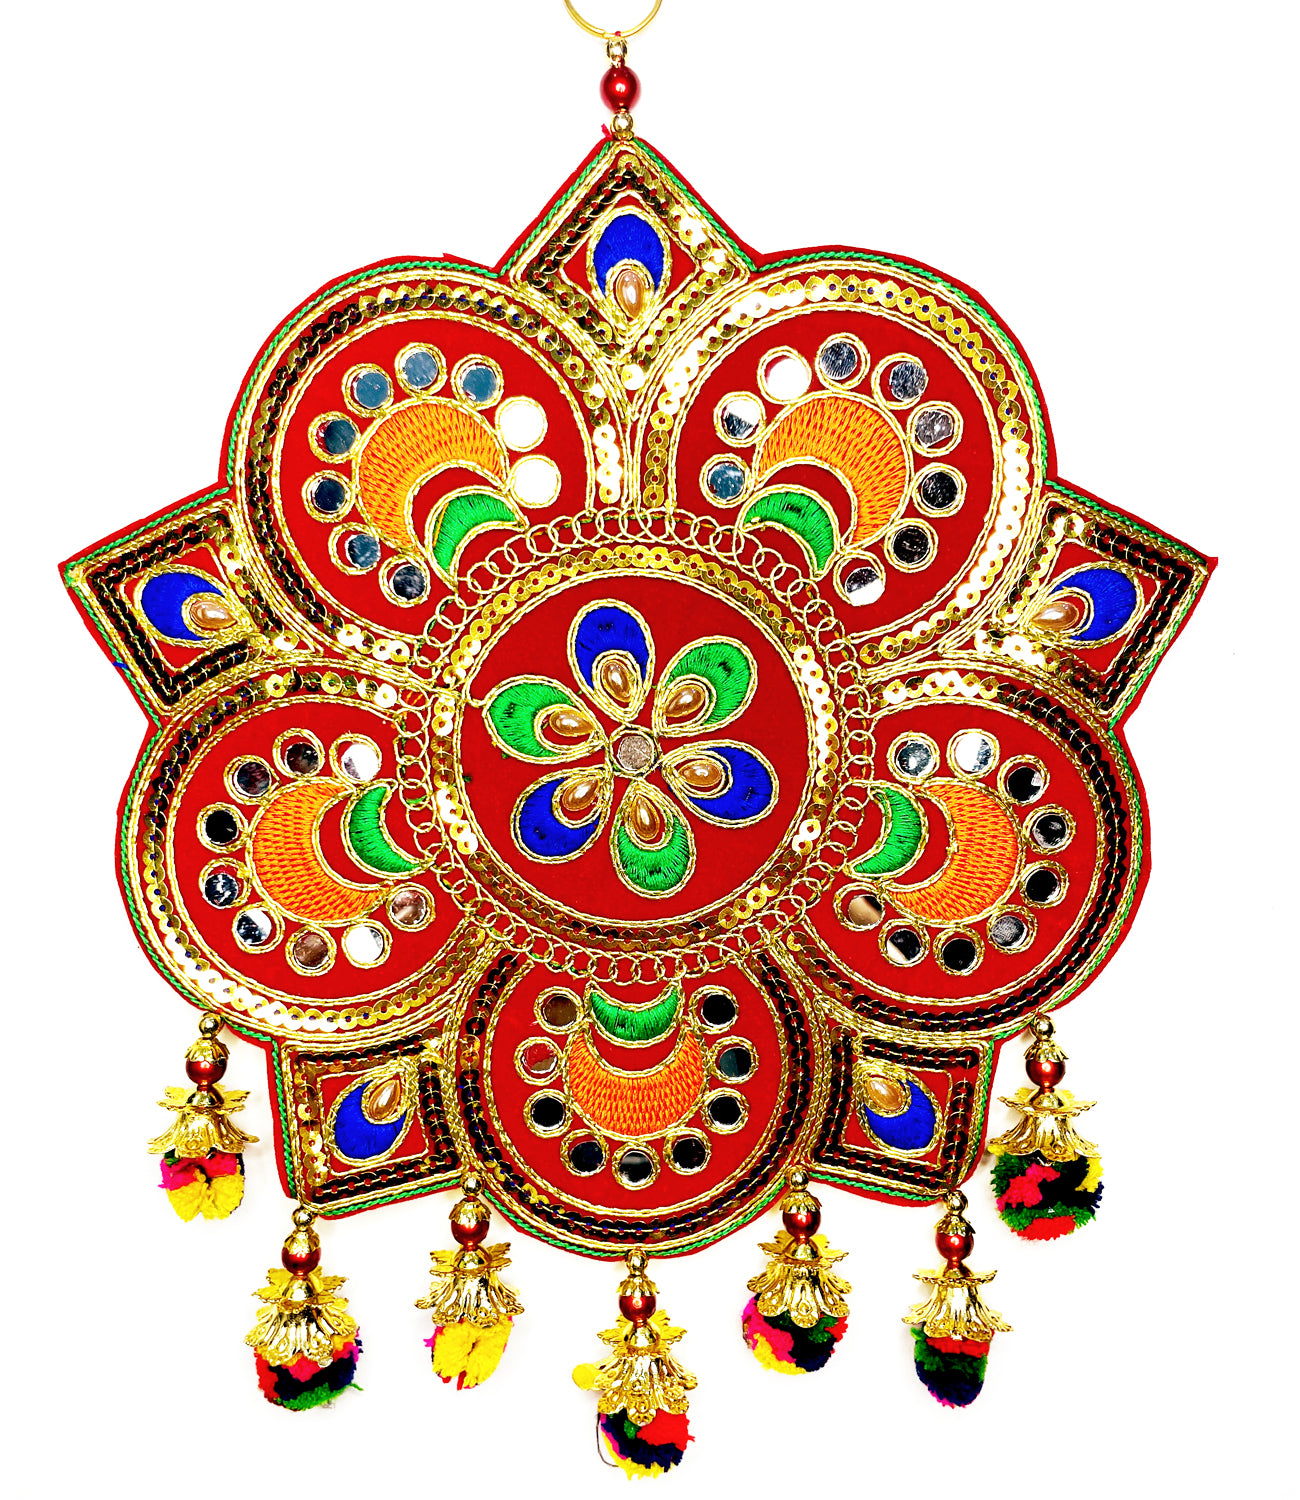 A set of 2 pieces, Star Rangoli with Tassels and Mirror work Colorful Wall hangings Pooja Festive Home door decoration